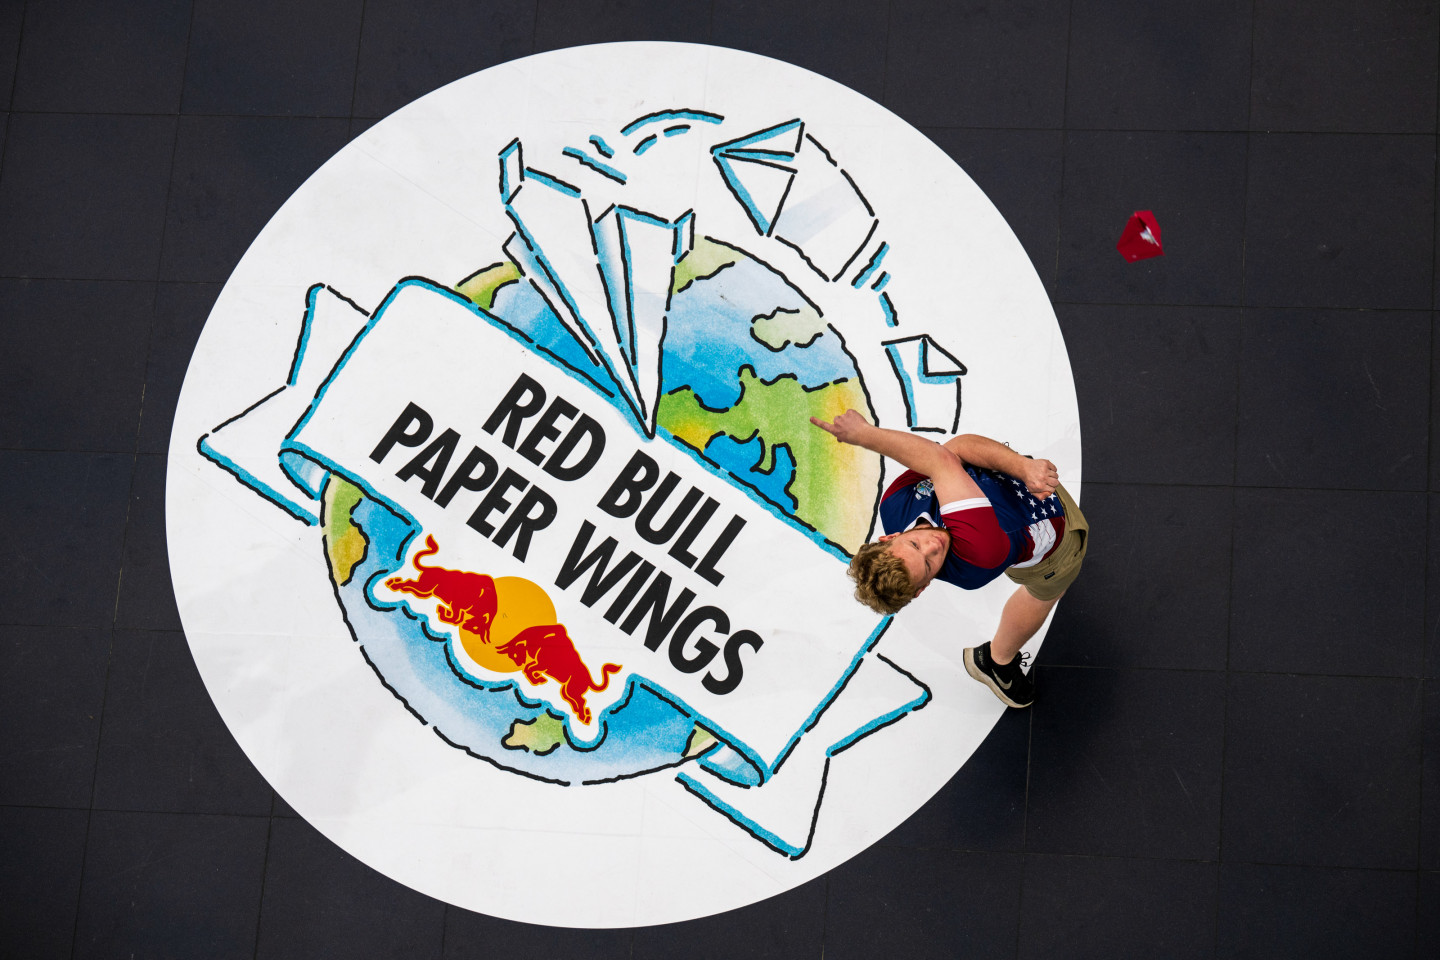 An aerial photo of Evin Cooper throwing a red paper airplane while standing on the "Red Bull Paper Wings" logo.